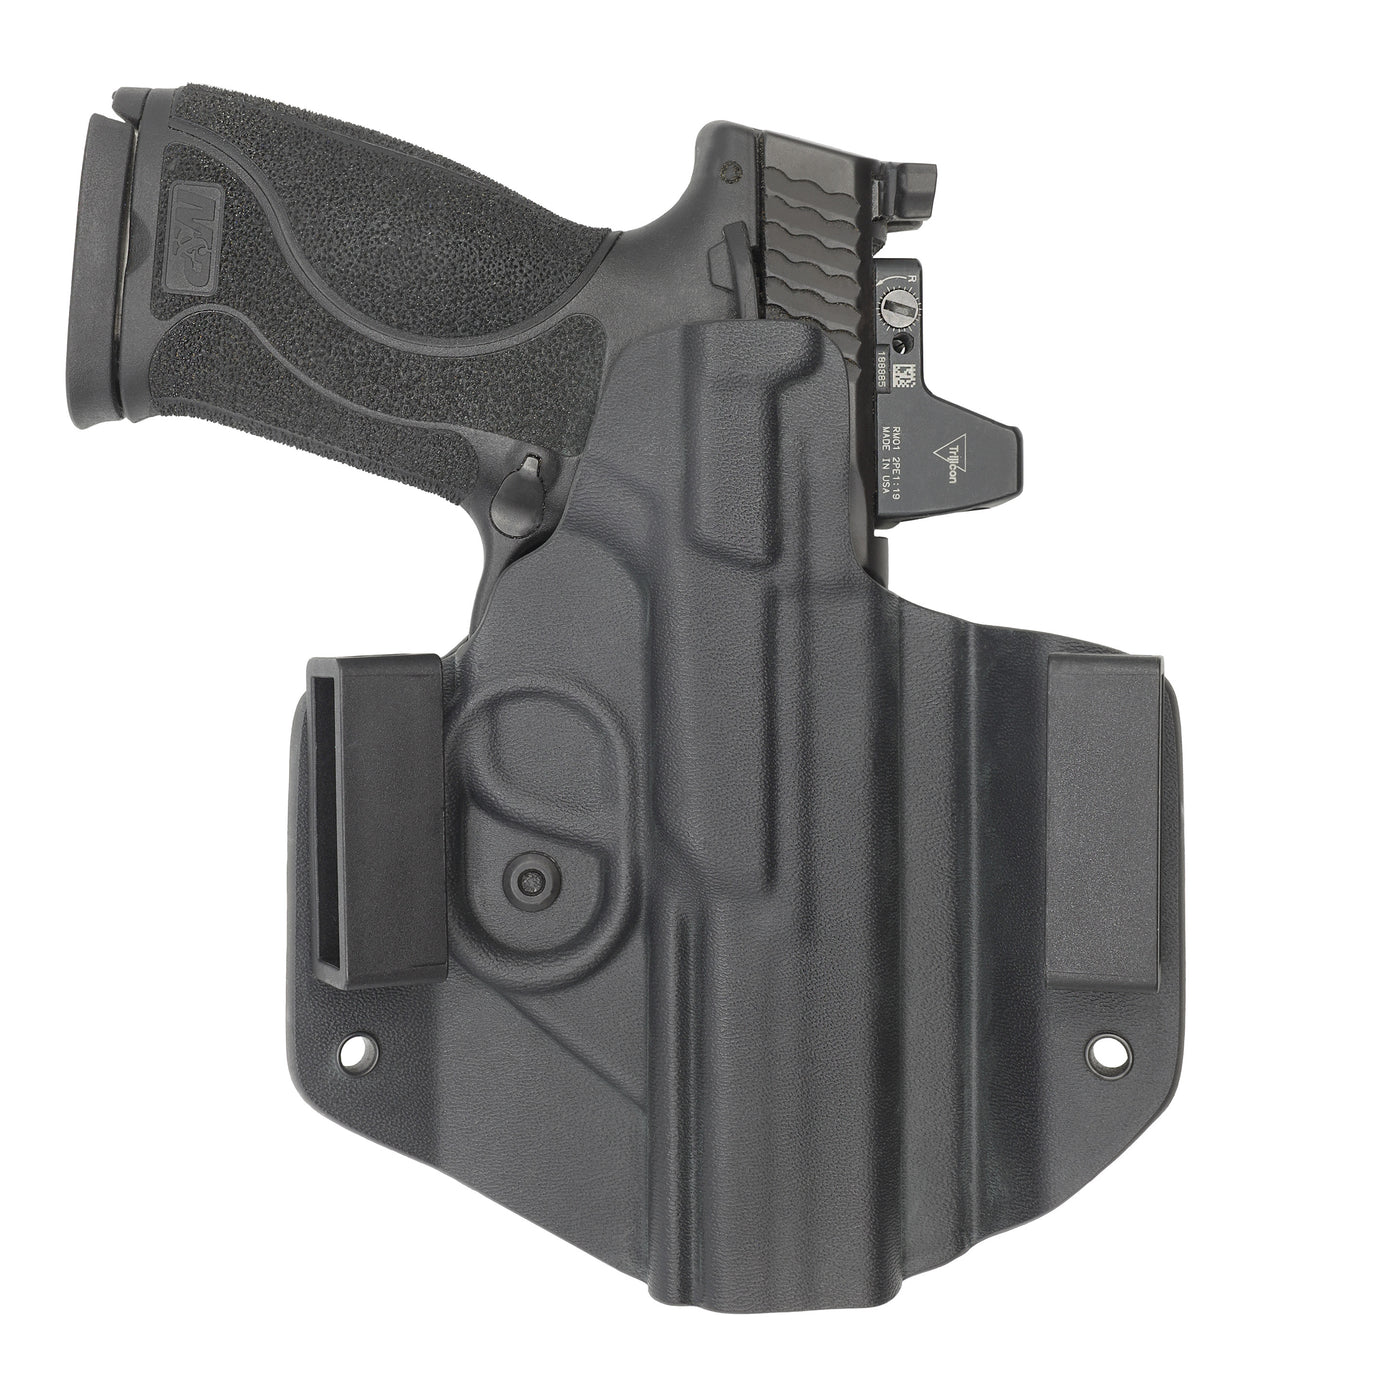 C&G Holsters custom OWB Covert S&W M&P 10/45 4.6" LEFT HAND in holstered position back view